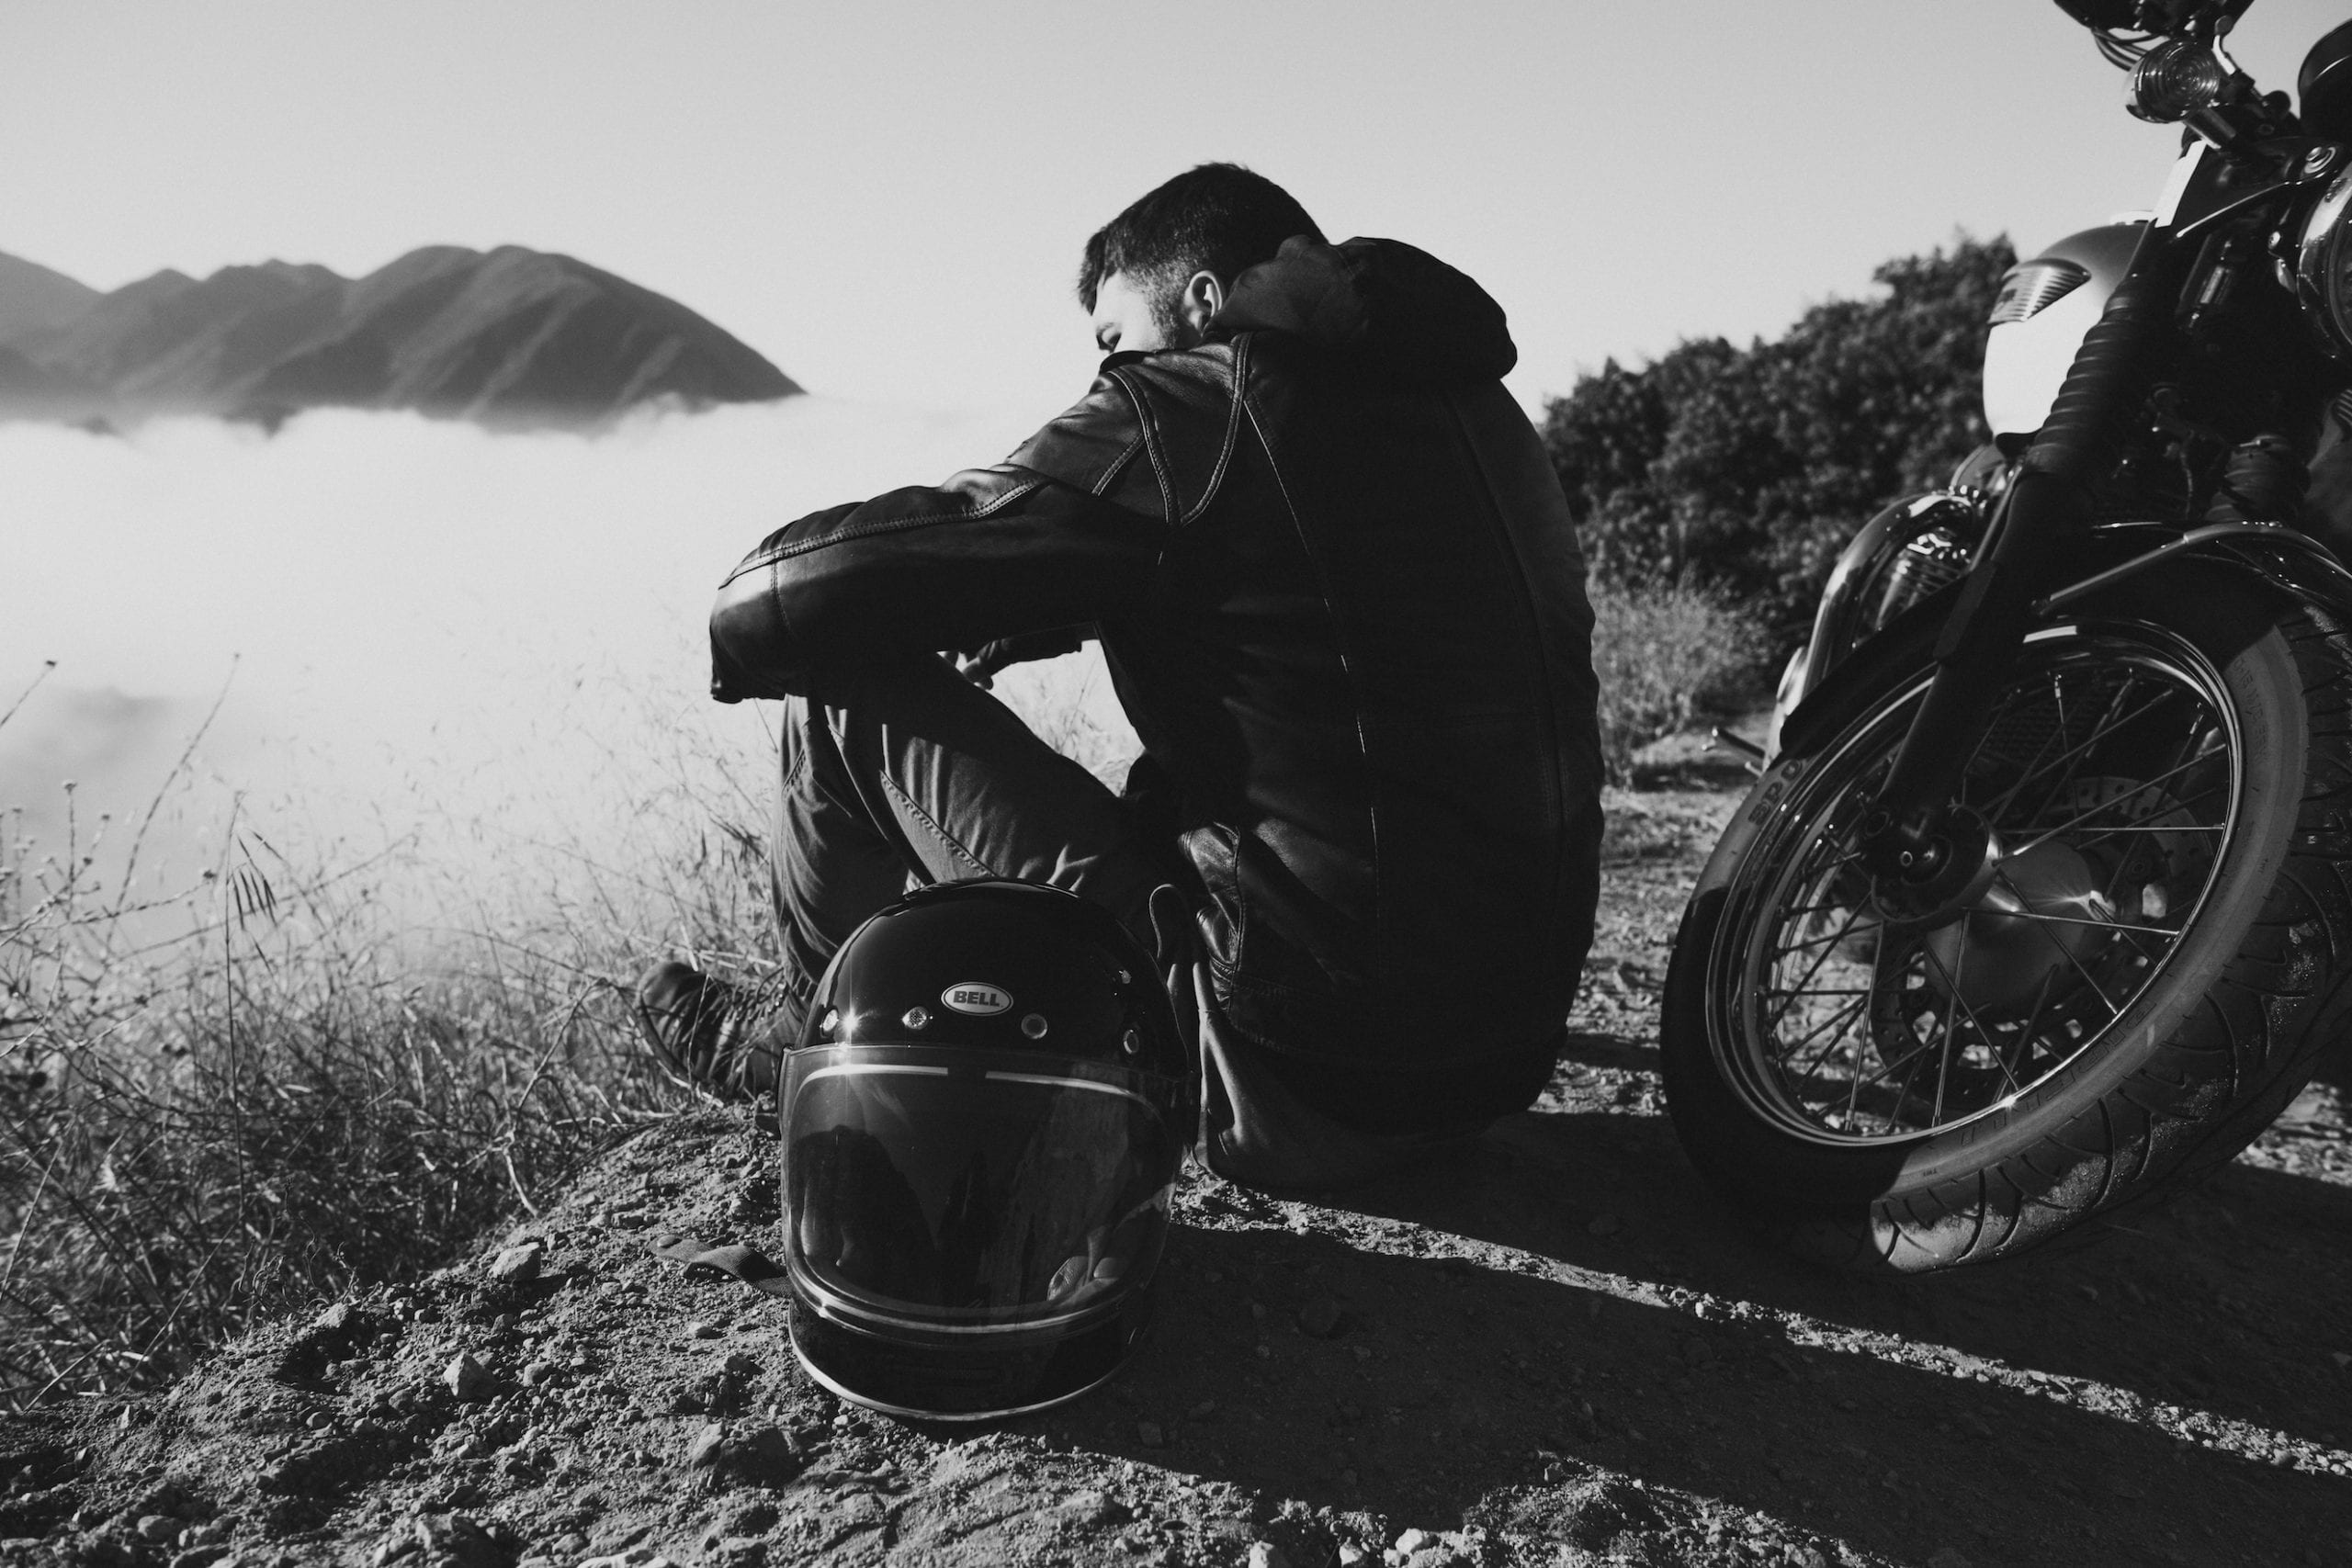 The motorcycle rider relaxes on the side of the road with his Bell Bullet helmet and motorcycle nearby.